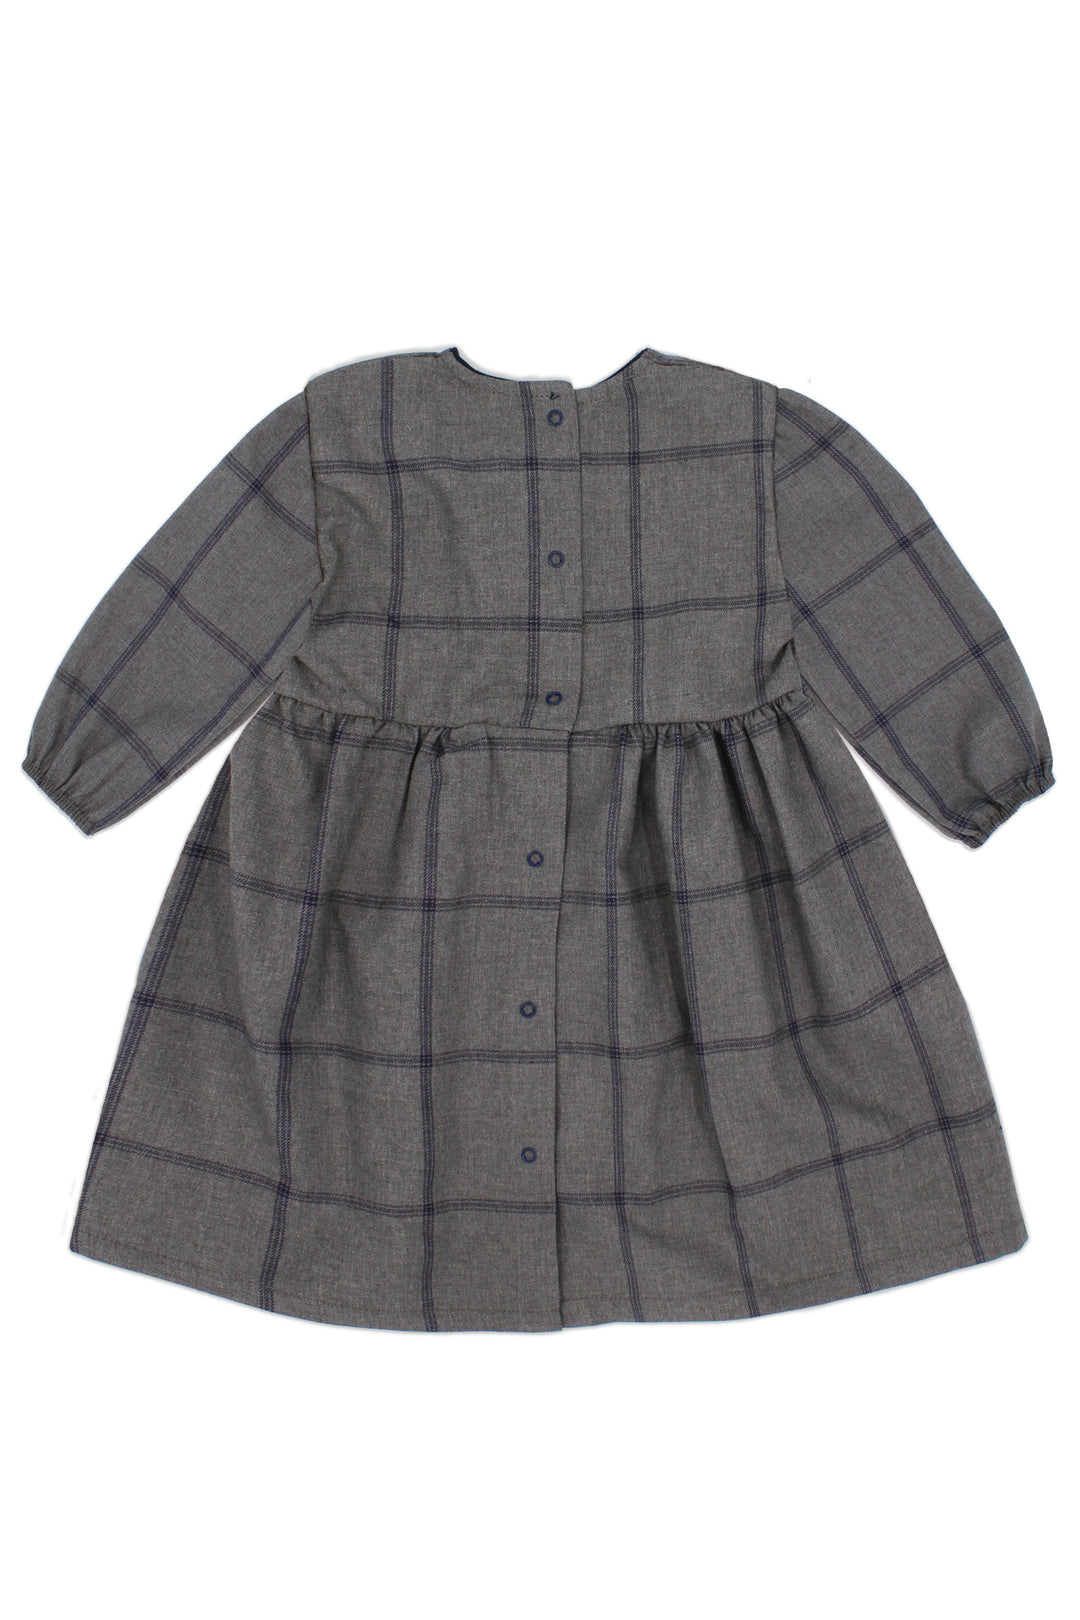 Rapife "Reese" Grey & Navy Check Dress | Millie and John